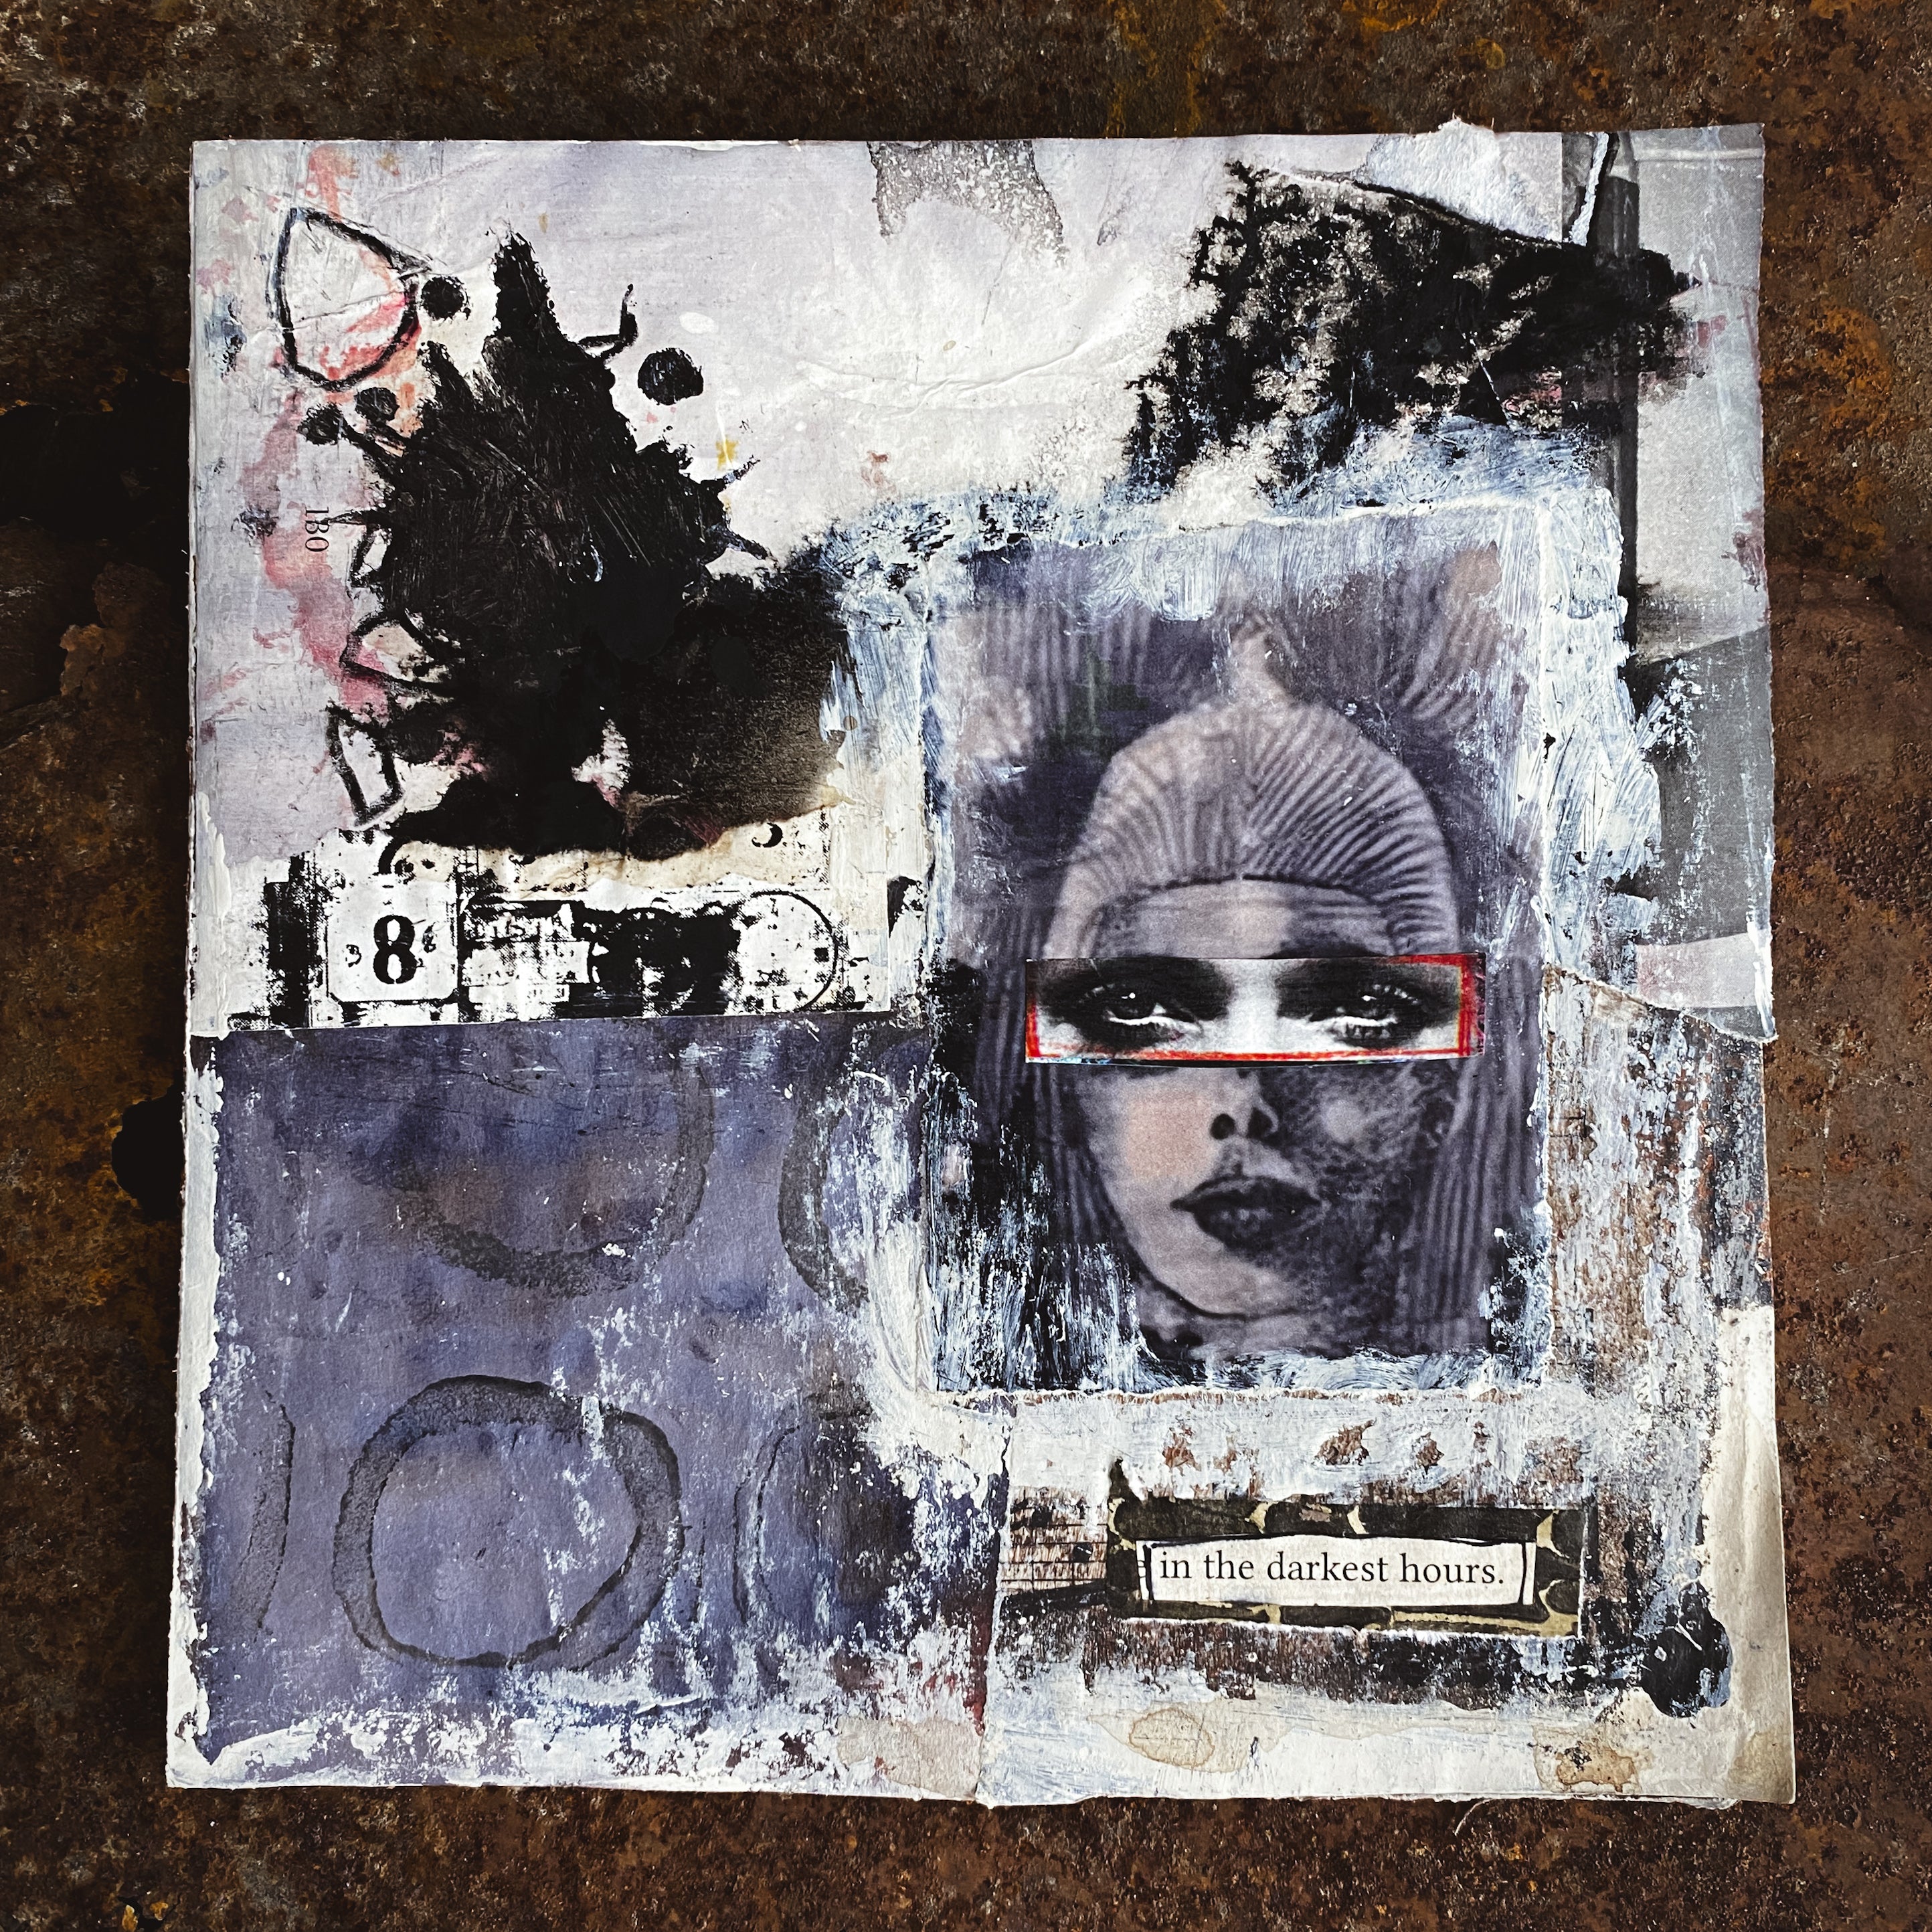 In the Darkest Hours - Original Mixed Media Collage